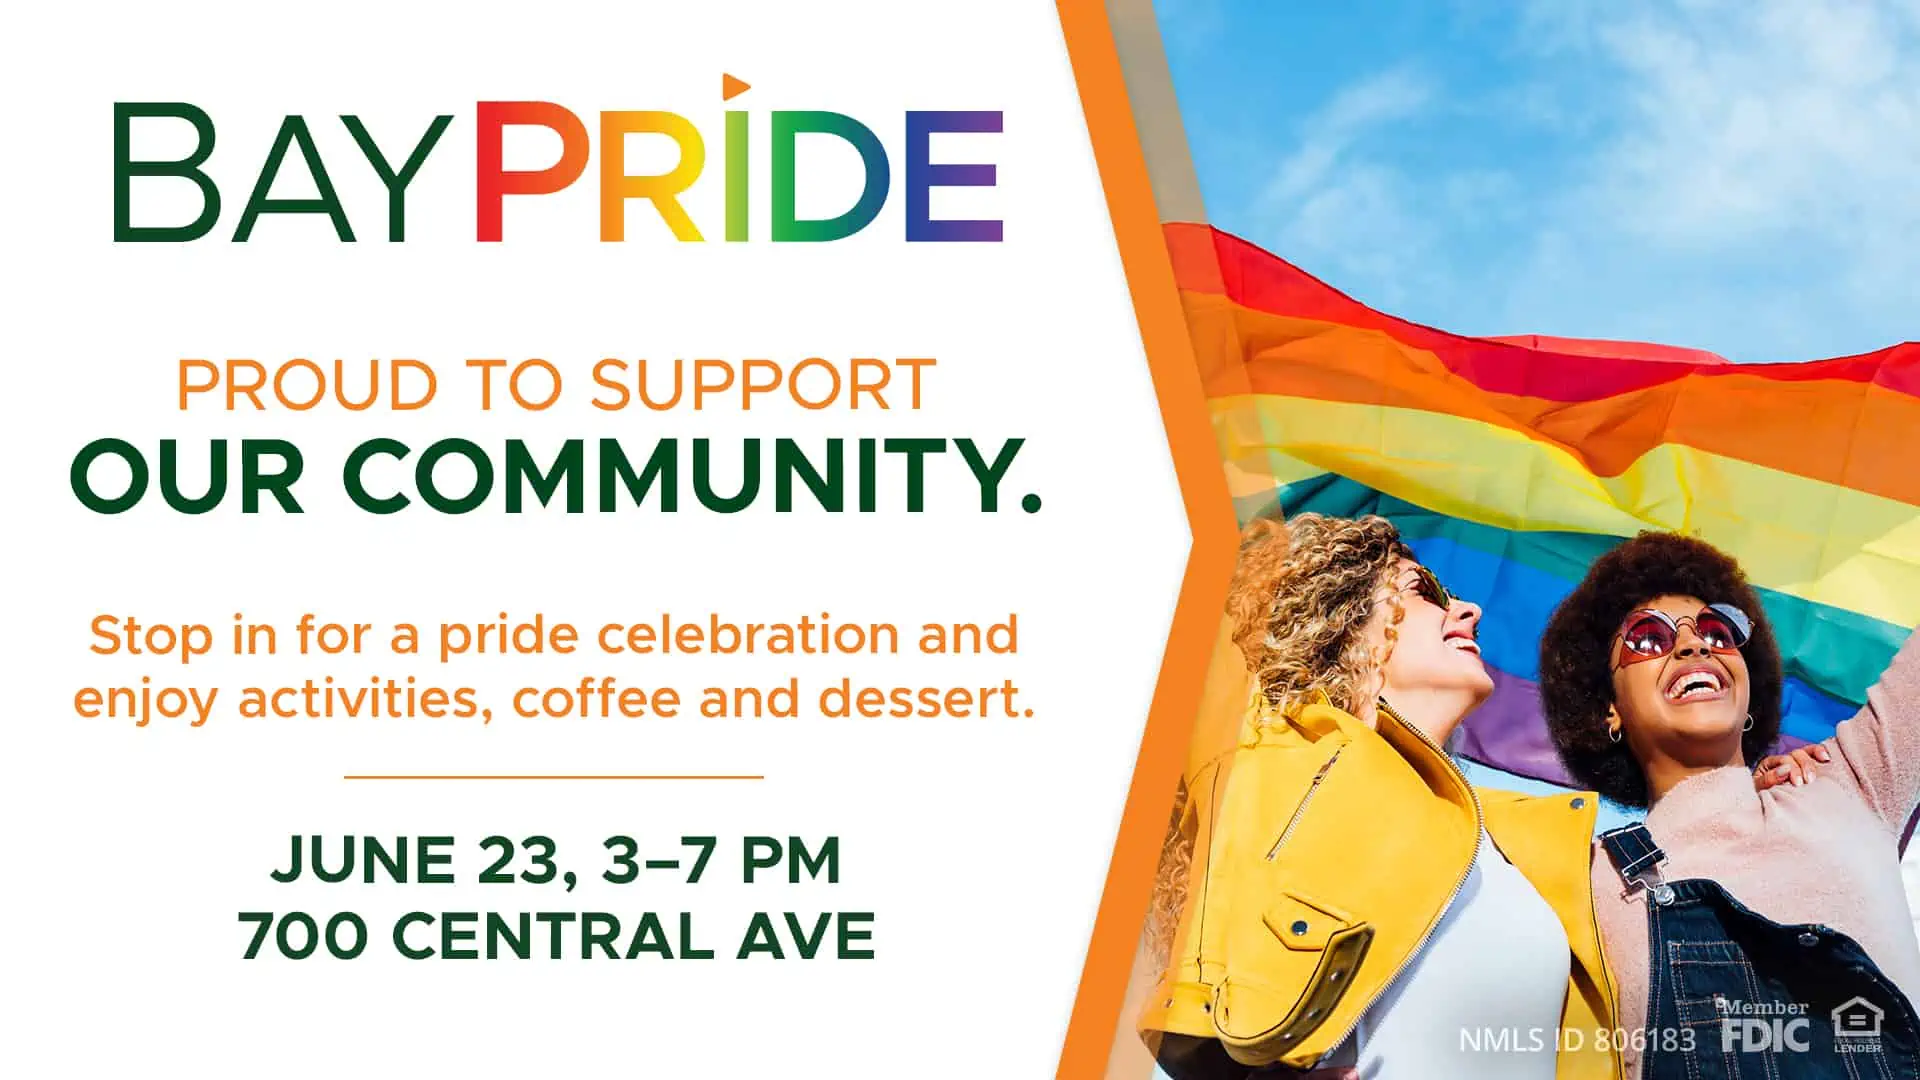 Pride Celebration at BayFirst Financial locations on June 23 from 3pm-7pm